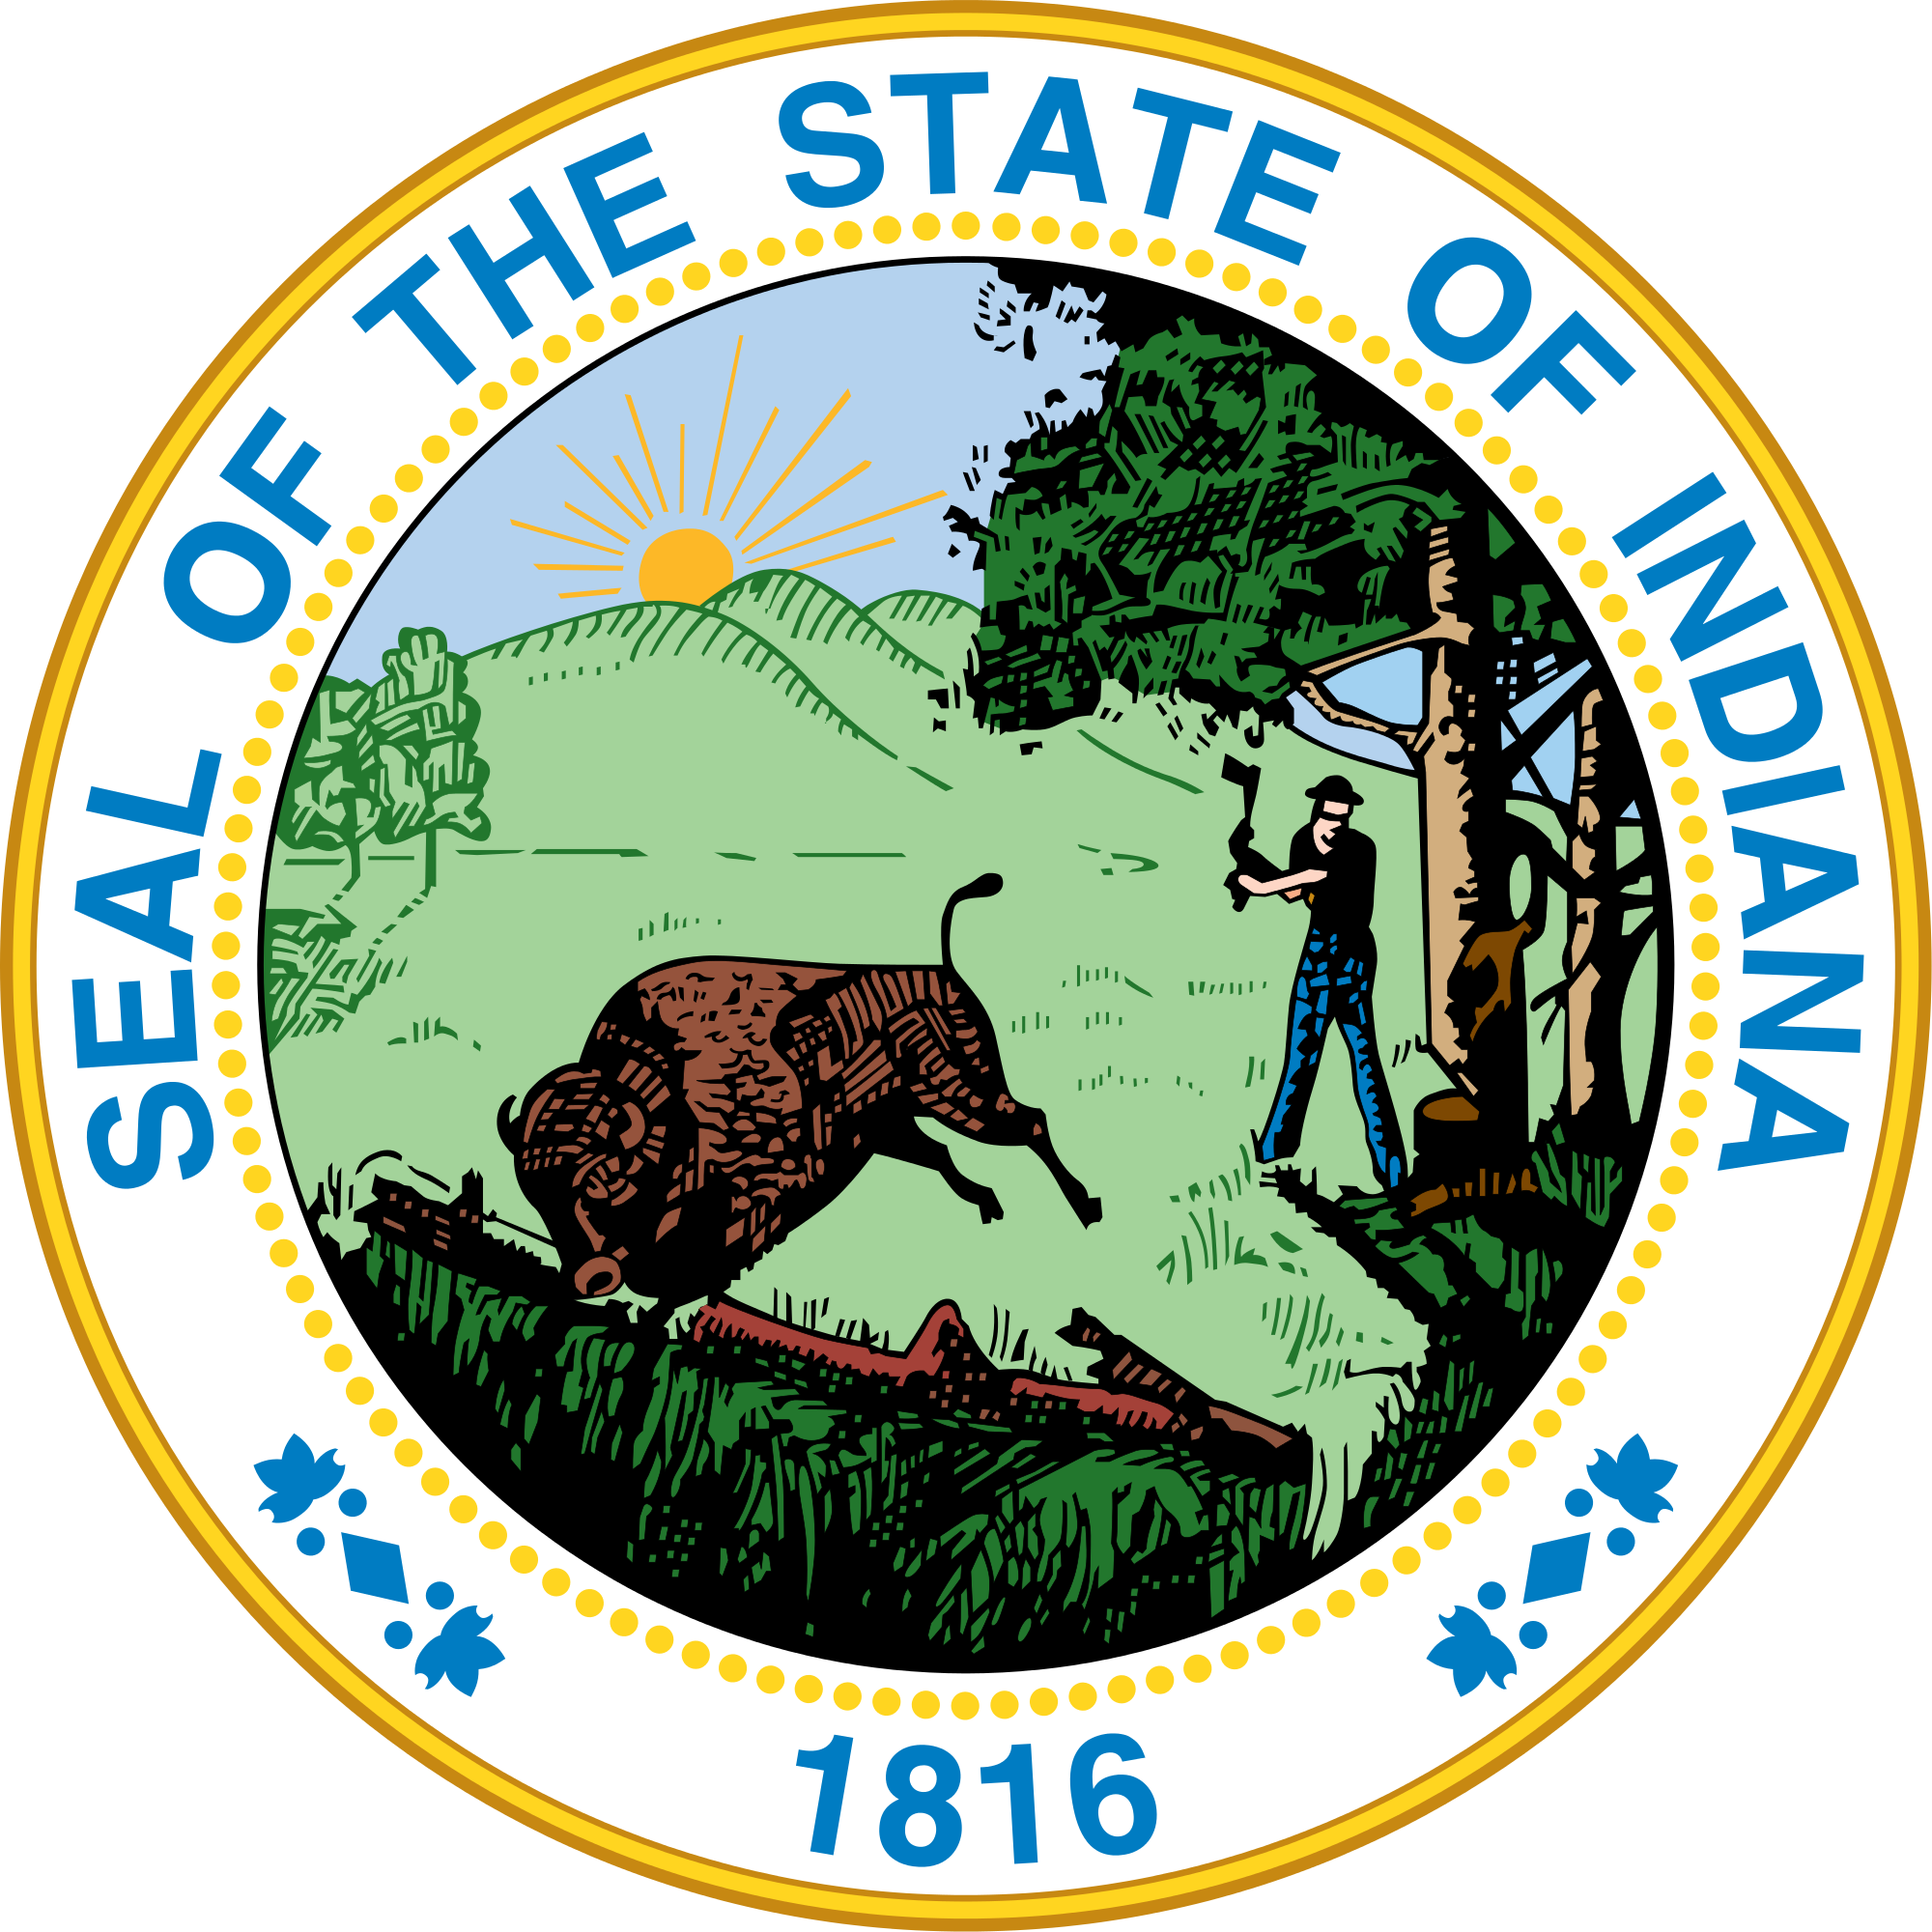 Indiana State Seal - Seal Of The State Of Indiana (2000x2000)